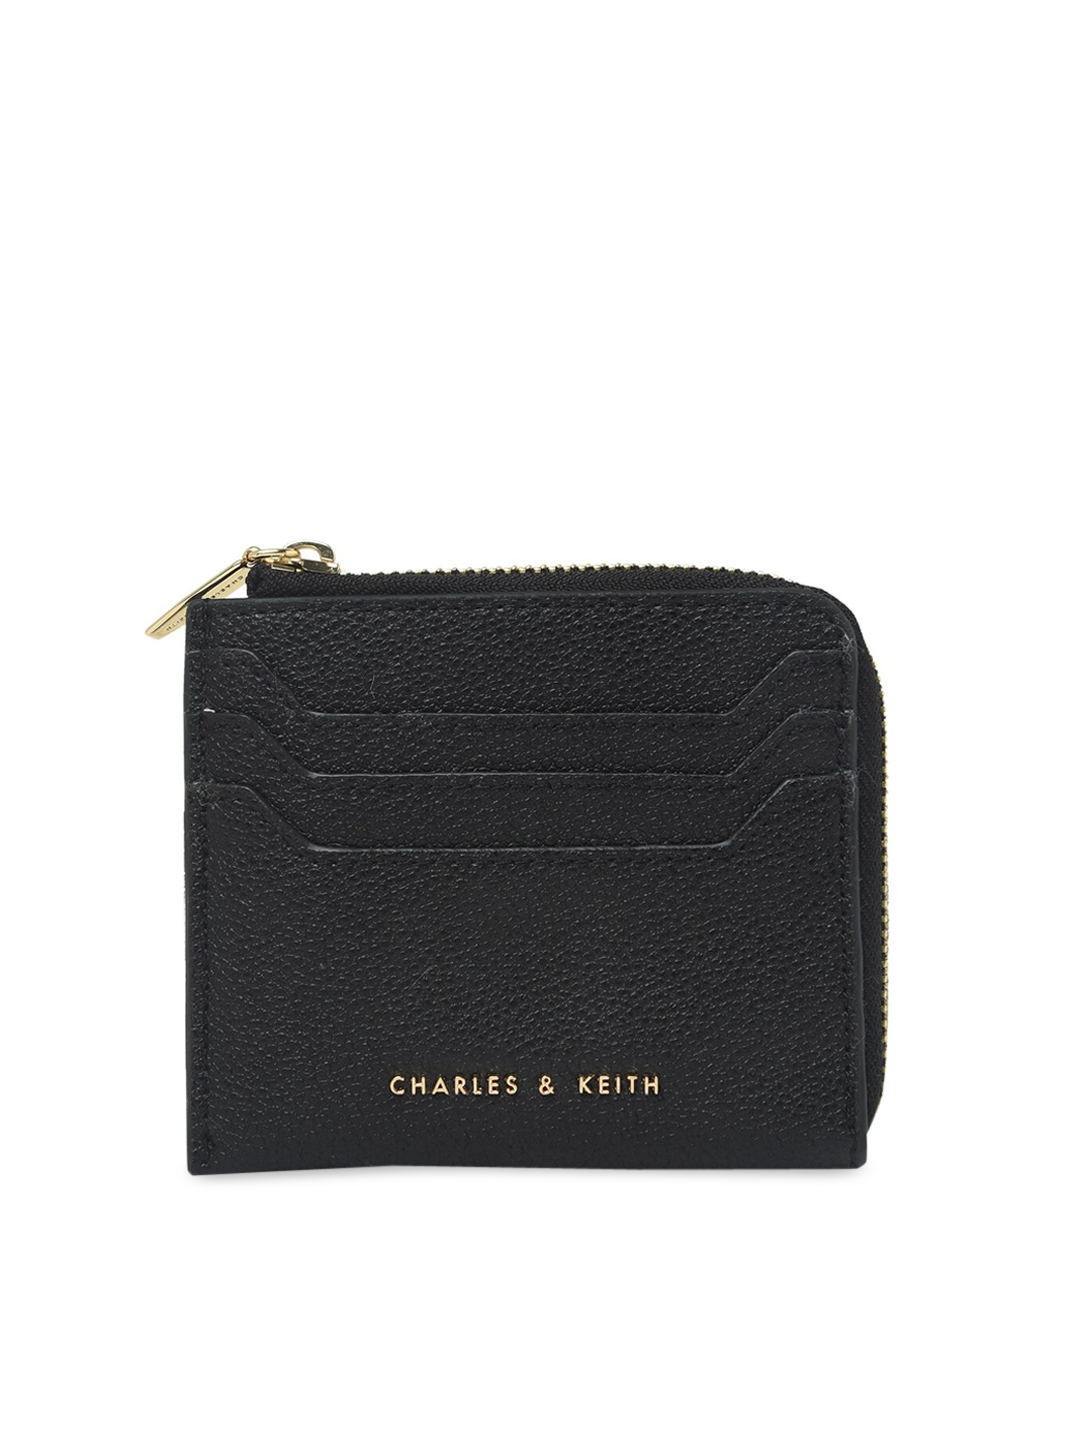 Buy CHARLES & KEITH Women Black Solid Zip Around Wallet - Wallets for